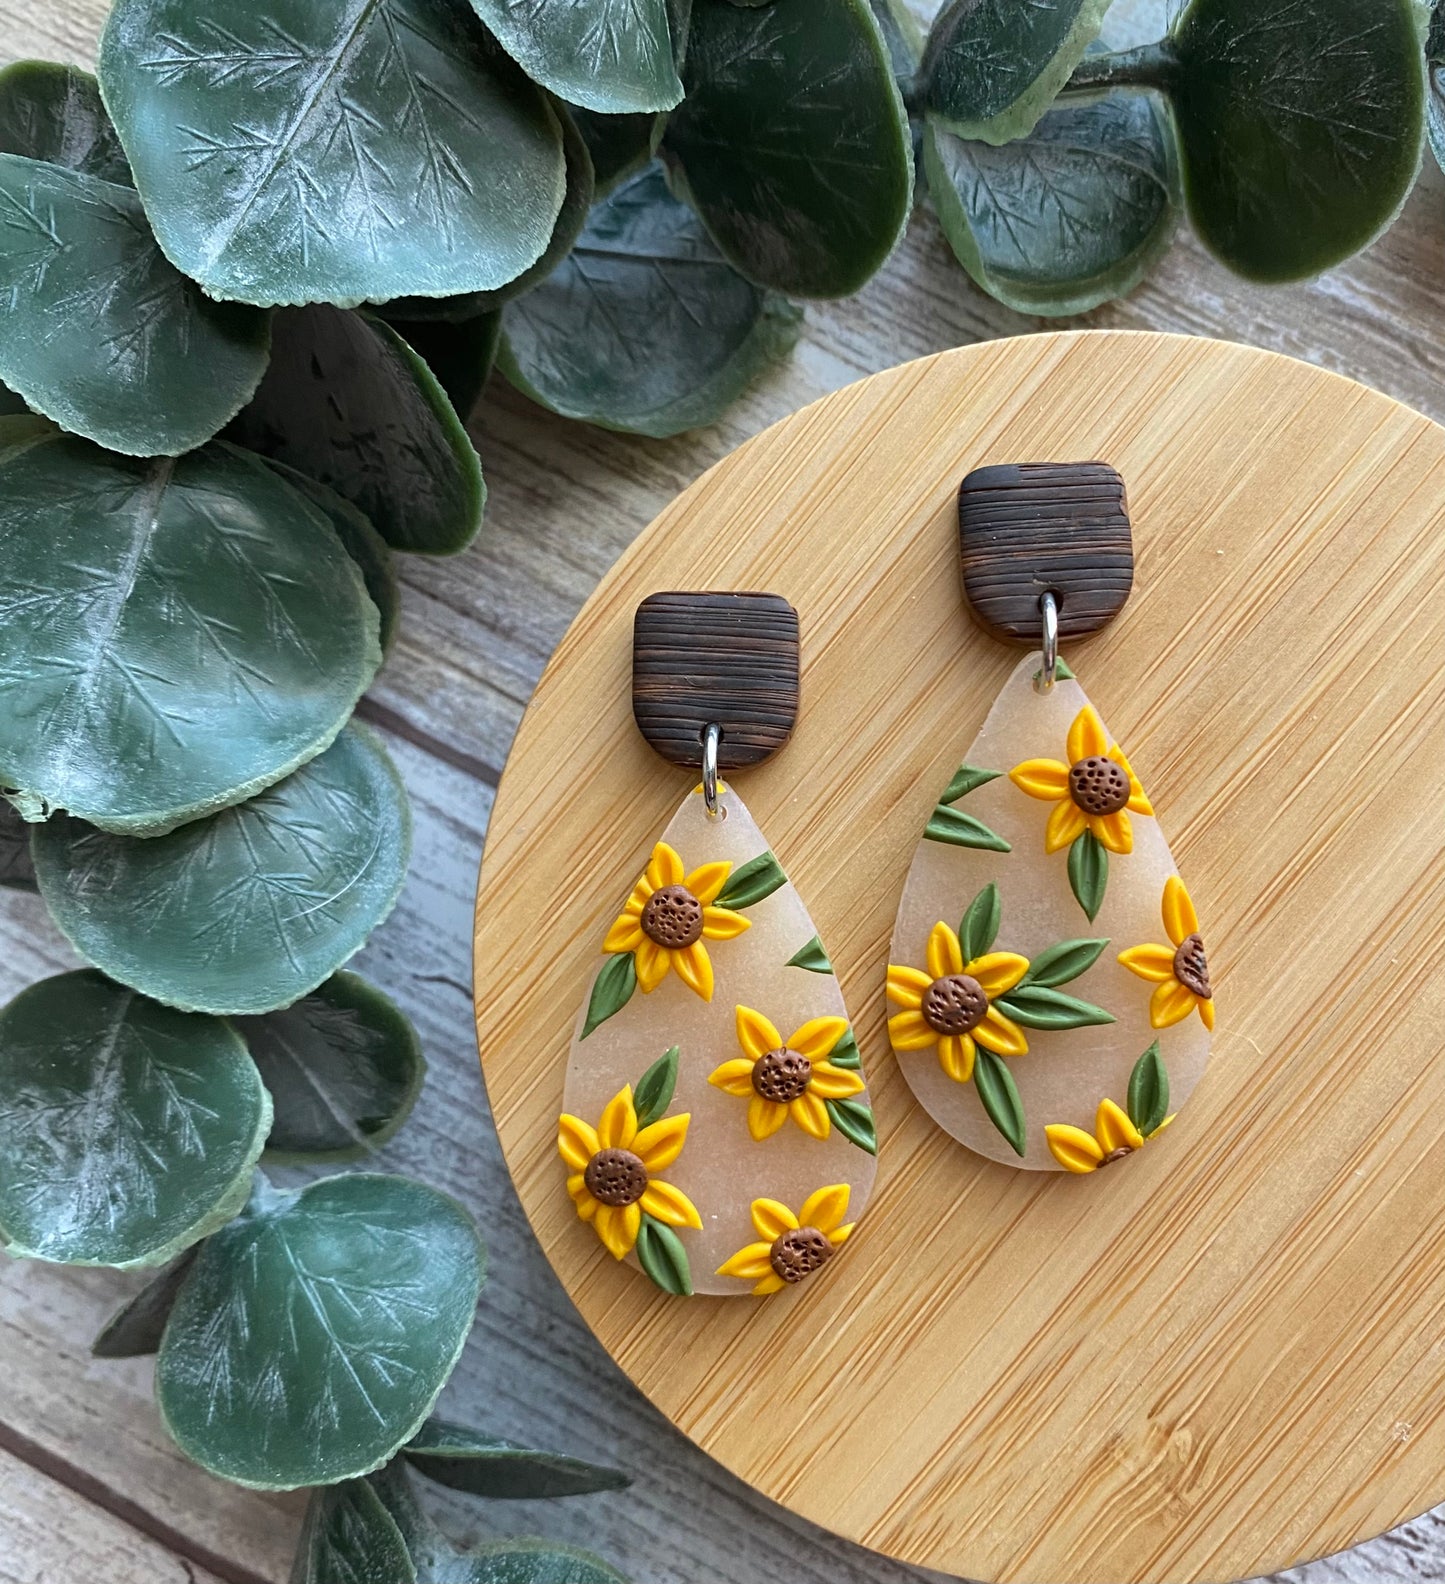 Frosted 1.5” teardrop dangles with sunflowers, faux wooden stud